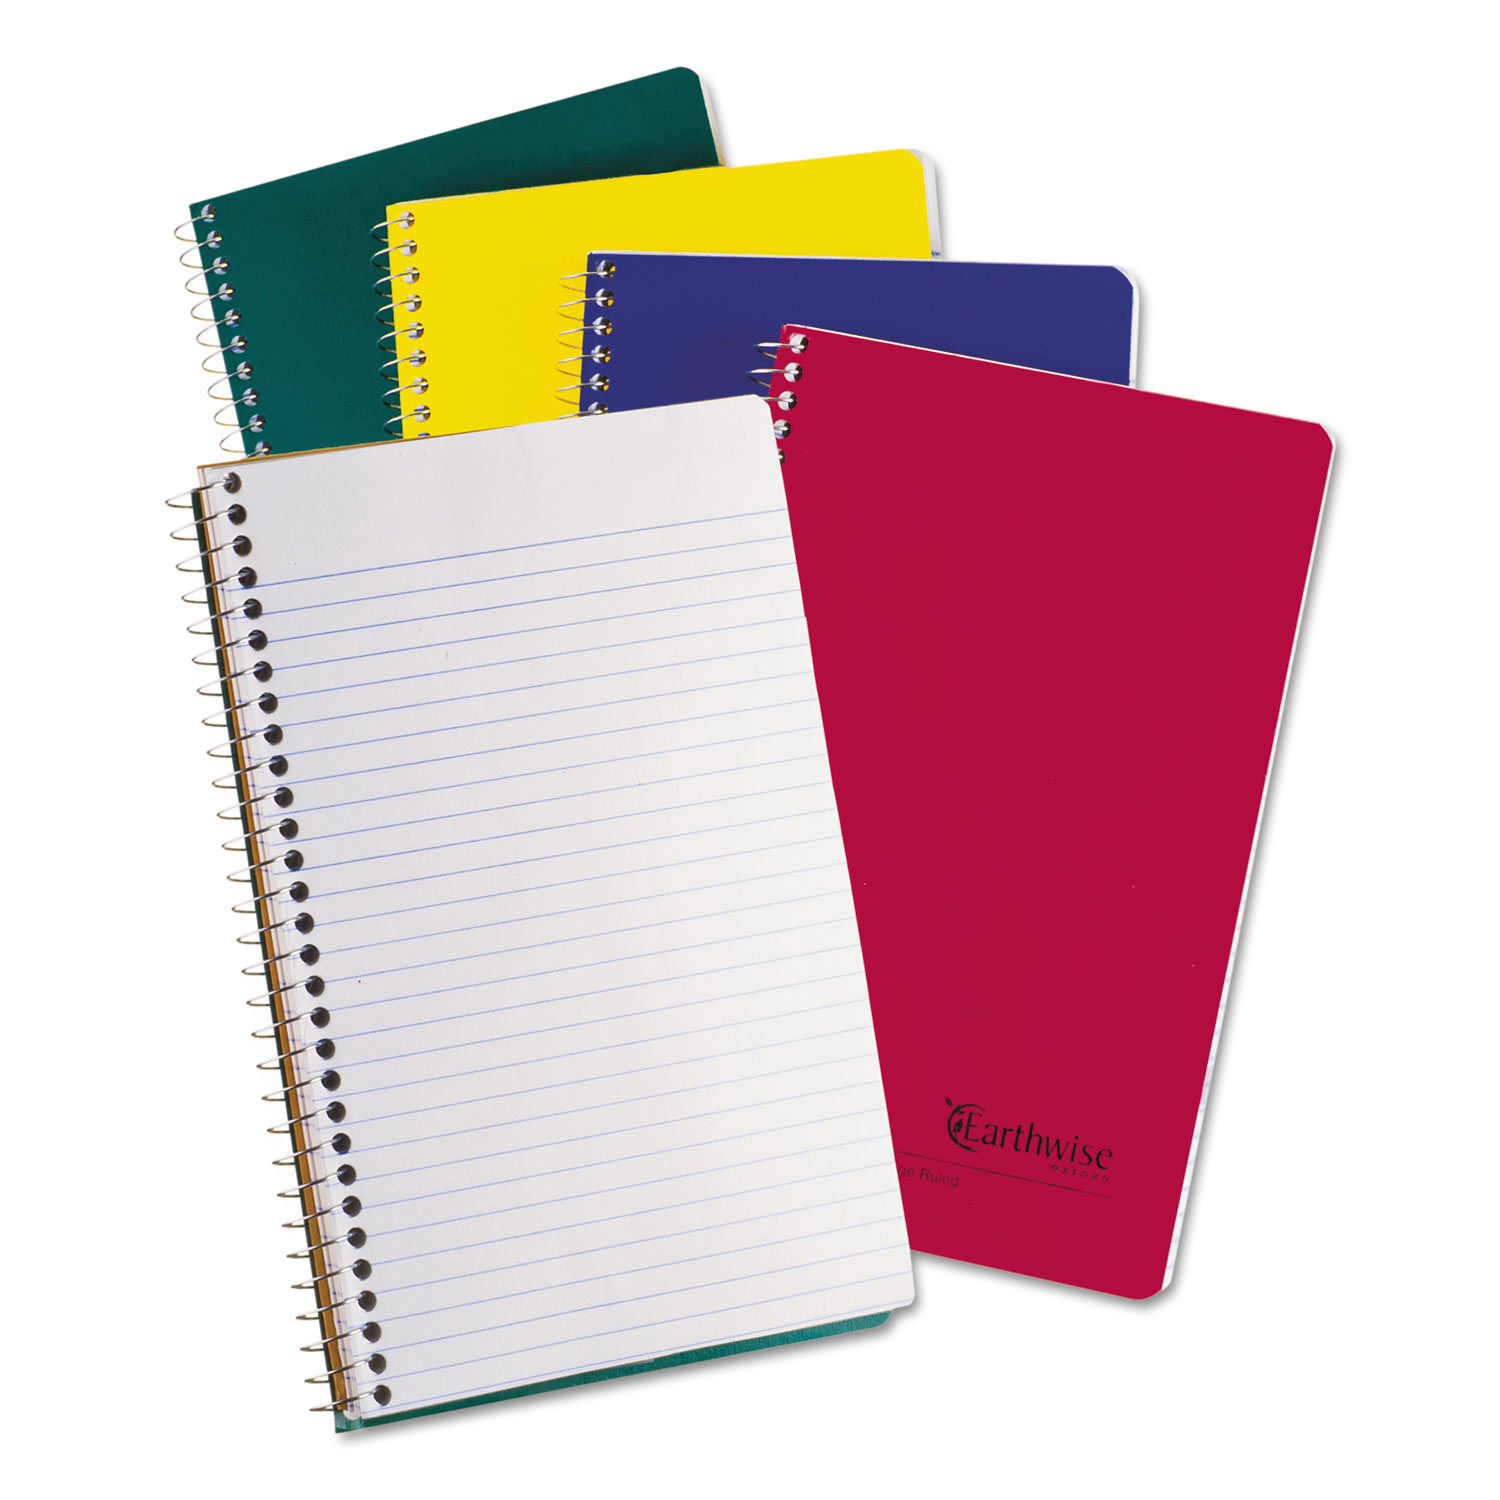 Oxford TOP25447 Earthwise Small Size Notebook, College/Medium, 9 1/2 x 6, White, 150 Sheets